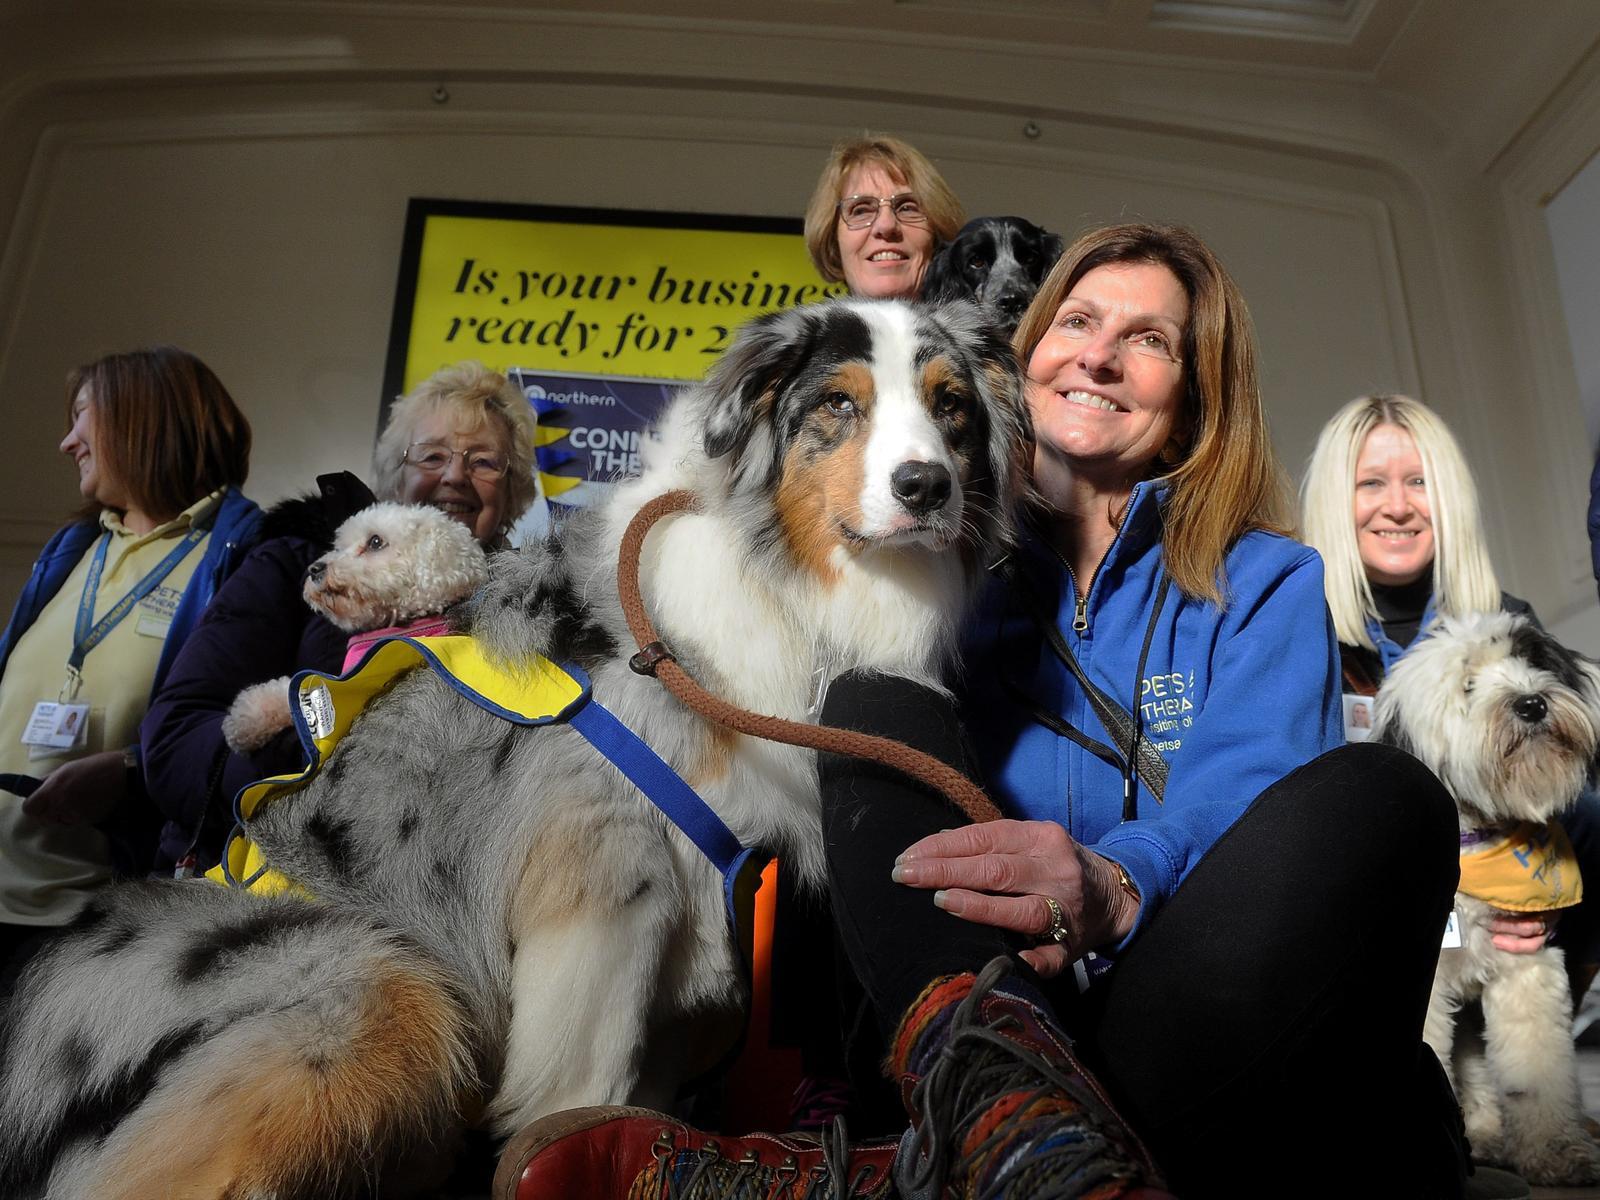 He added: "One of our conductors at Leeds works with Pets As Therapy - and has two dogs of her own...